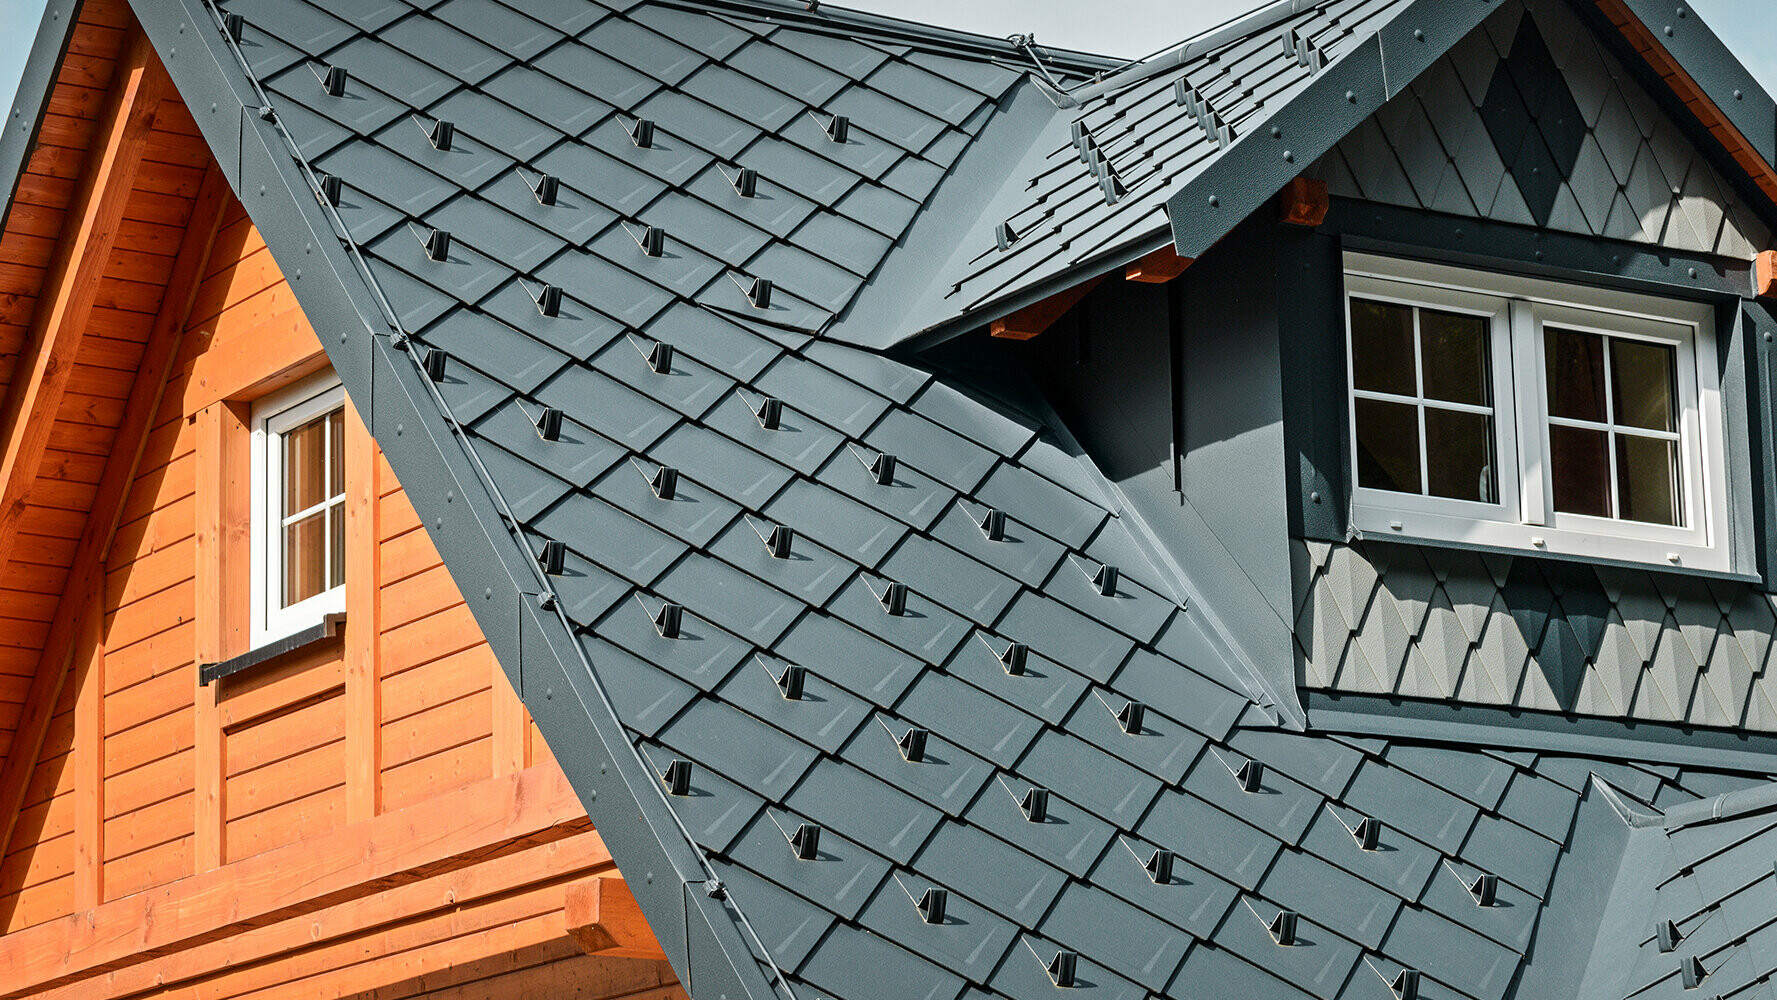 Guesthouse in the Czech Republic with PREFA 29 × 29 rhomboid roof tiles in P.10 anthracite